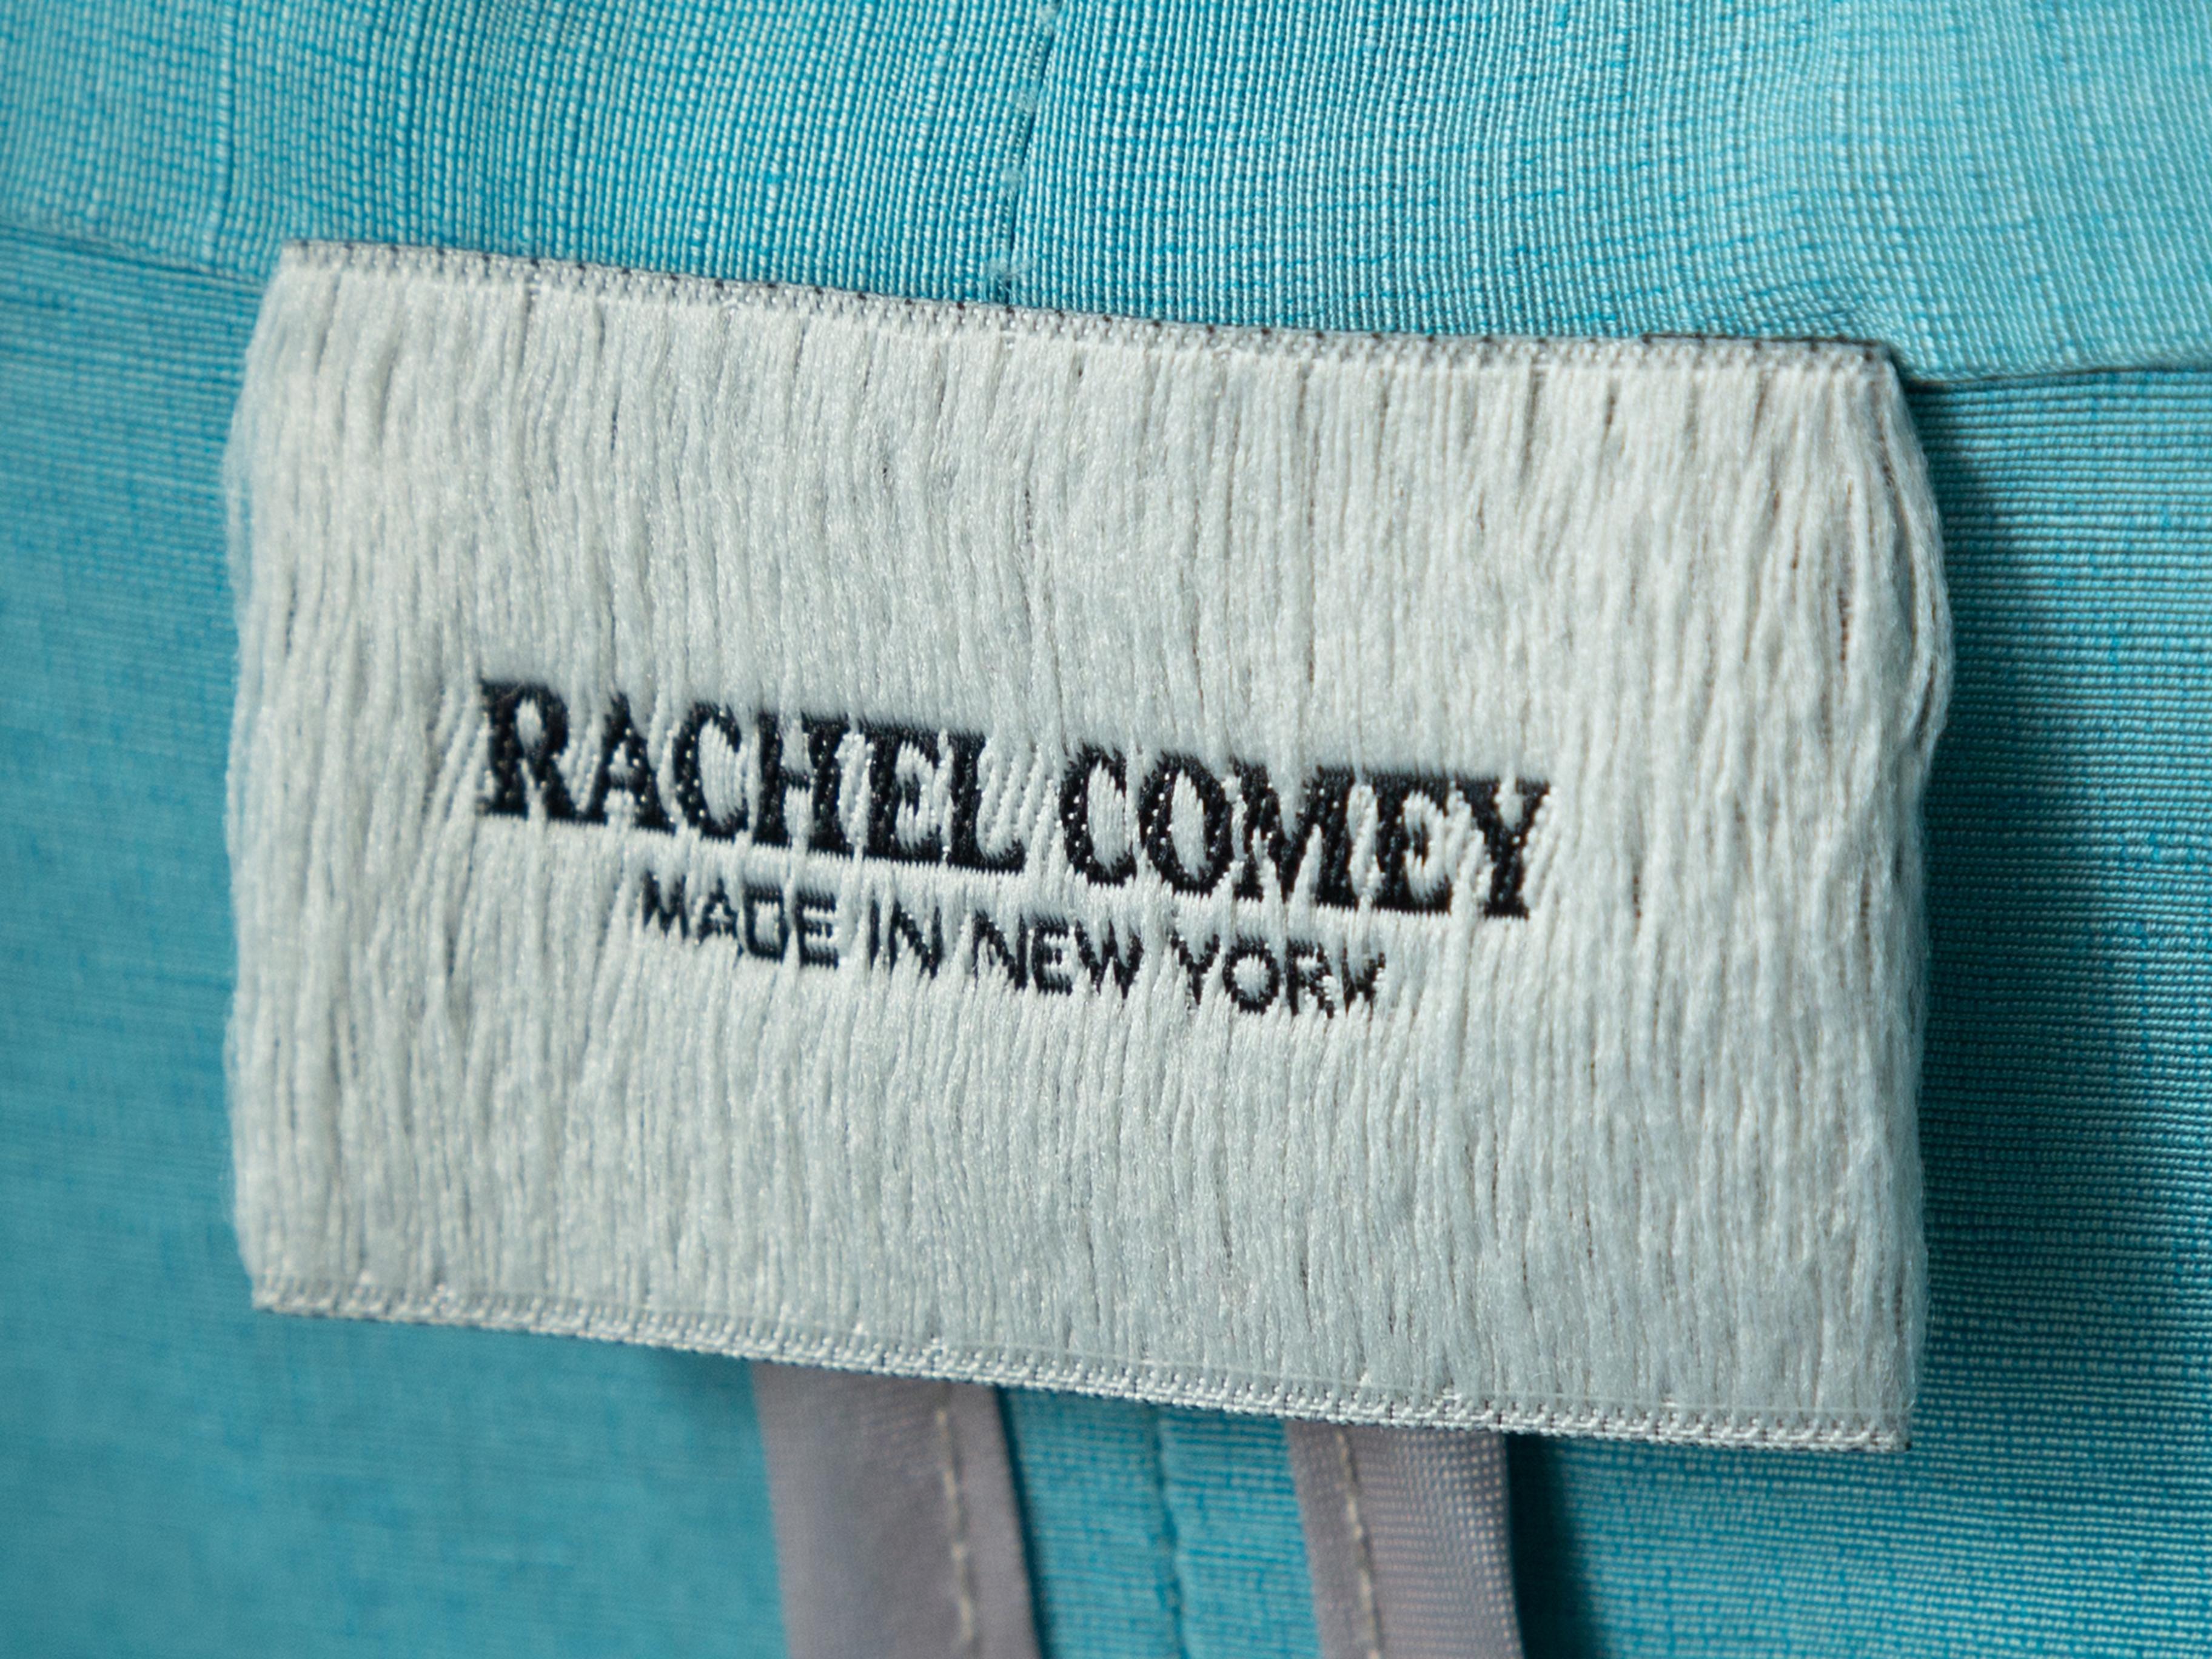 Product details: Turquoise three-quarter puff sleeve blouse by Rachel Comey. Pointed collar. V-neck. Designer size 2. 31